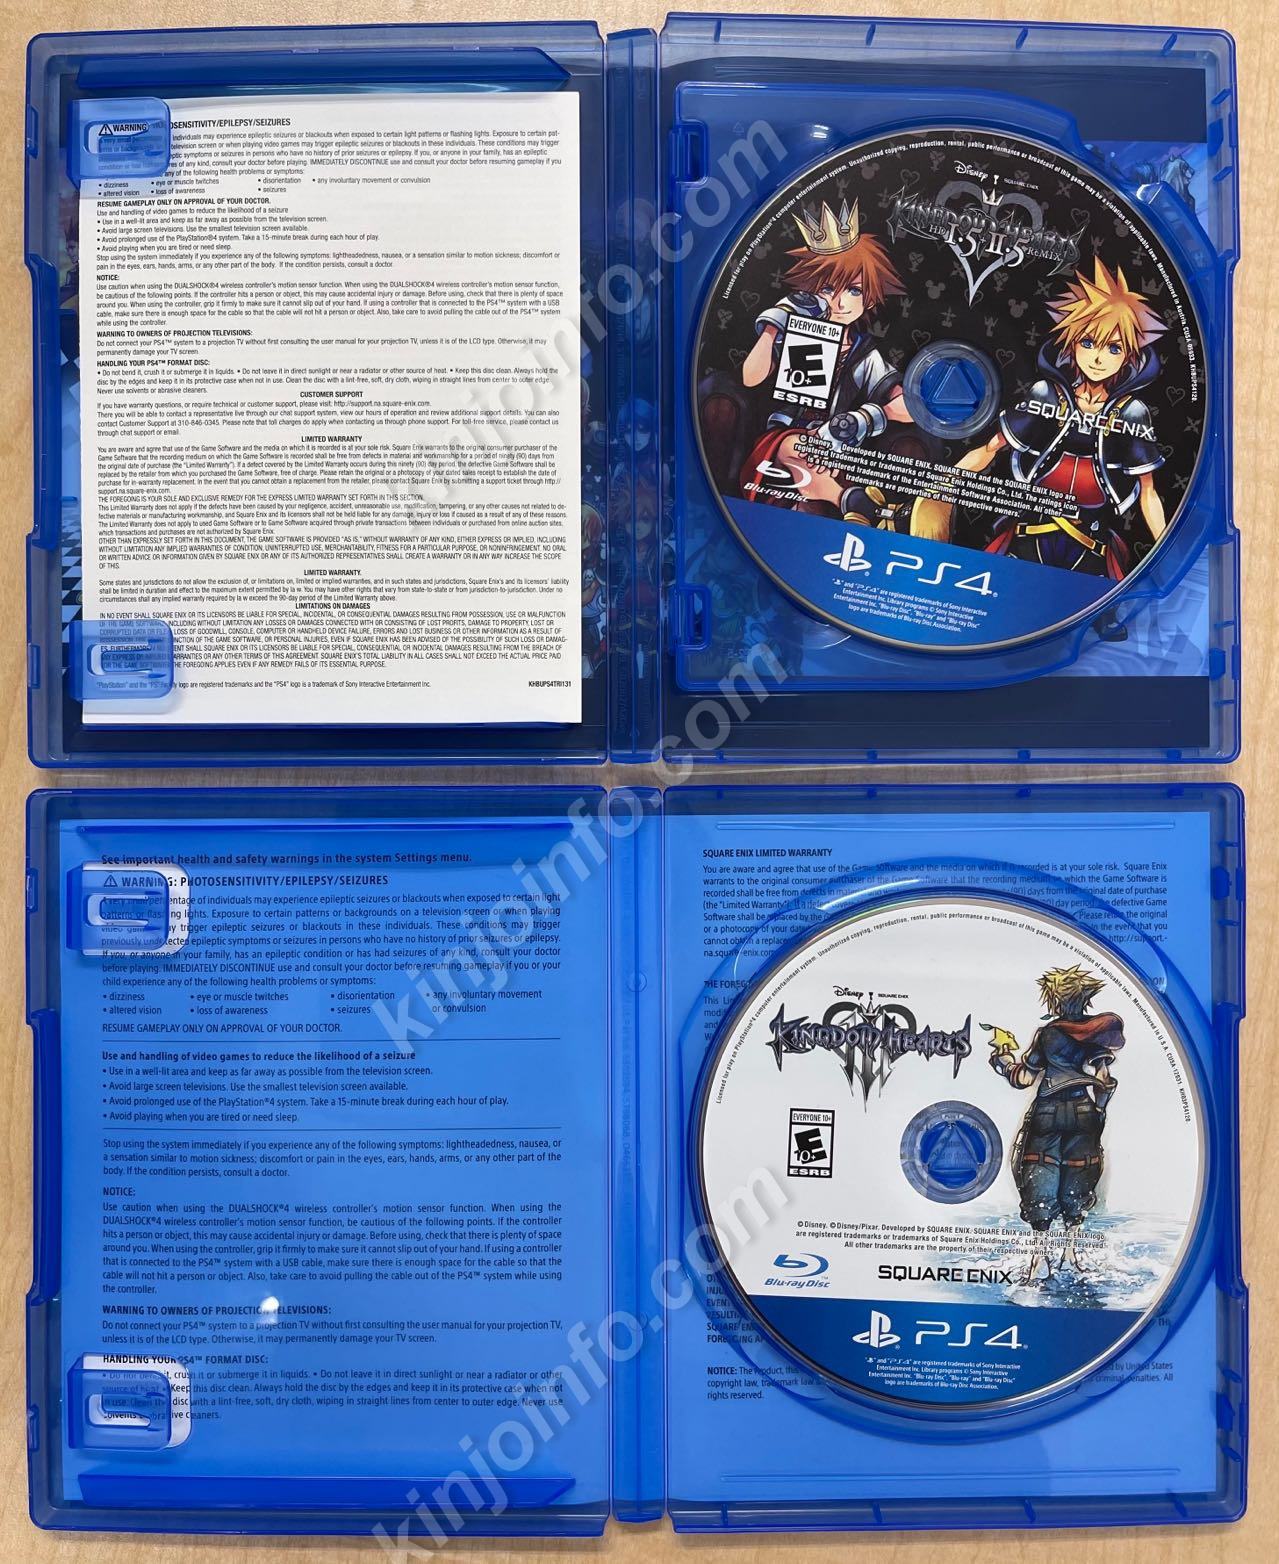 Kingdom Hearts All in one package *北米版